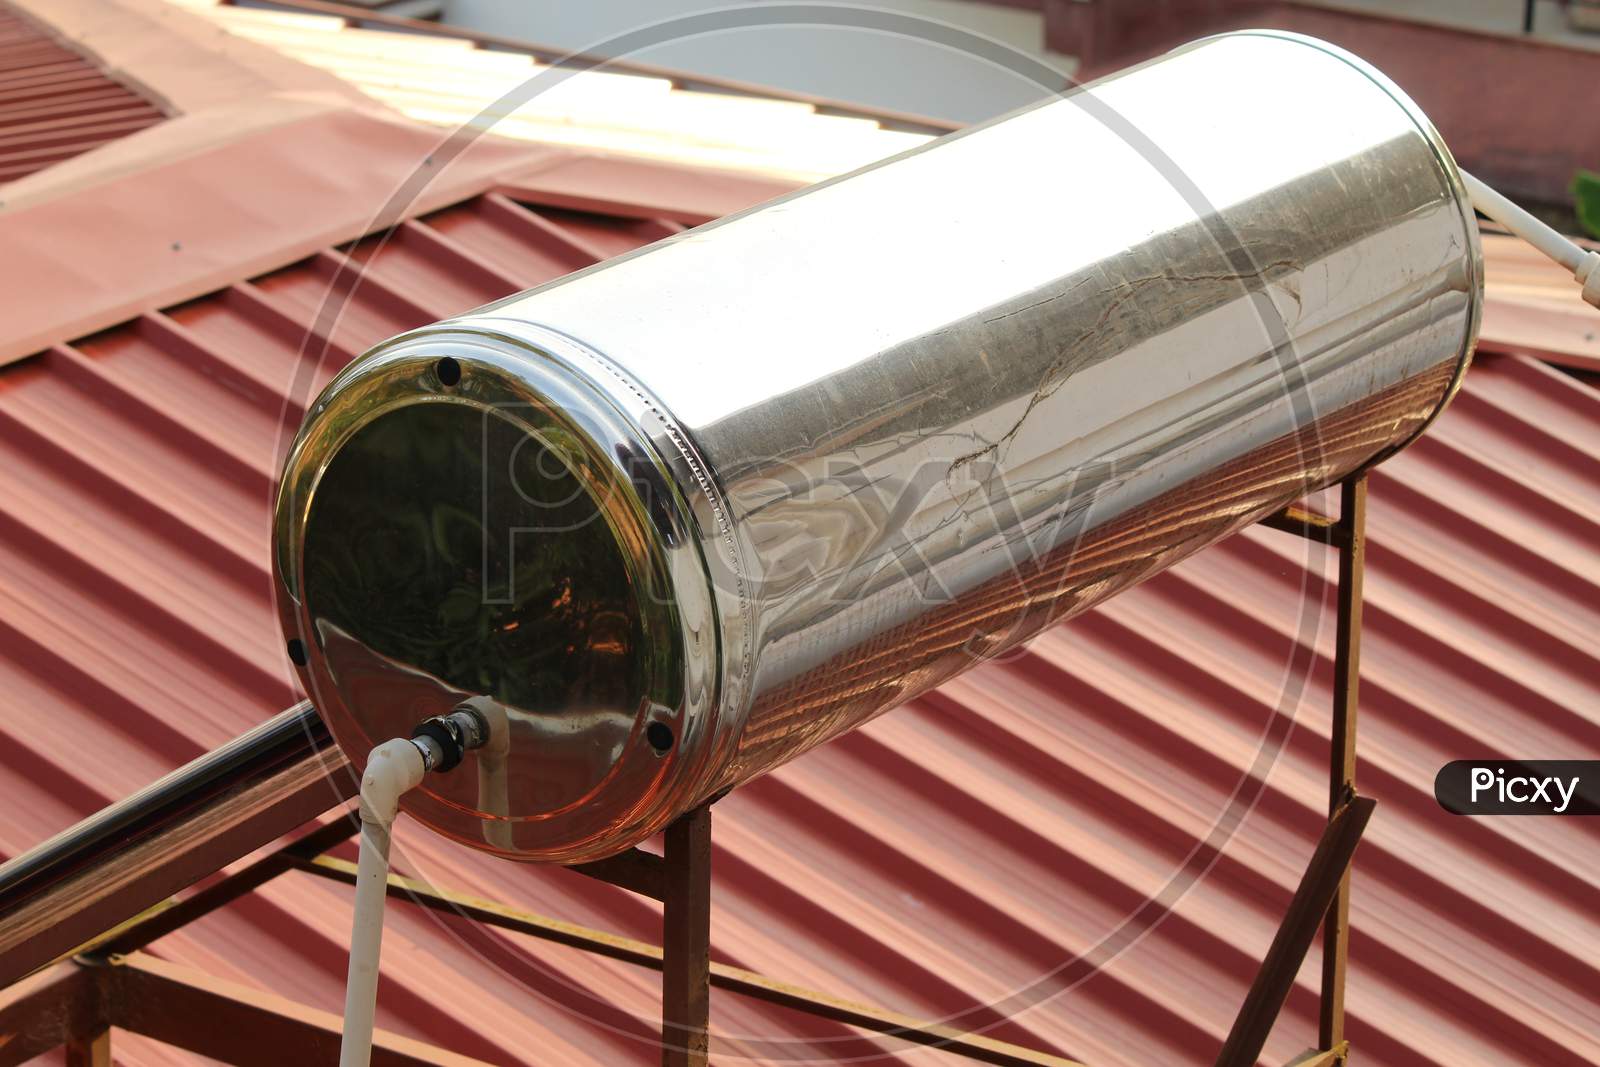 Solar Water Heater Tank Installed On The Top Of The Roof Of A Building